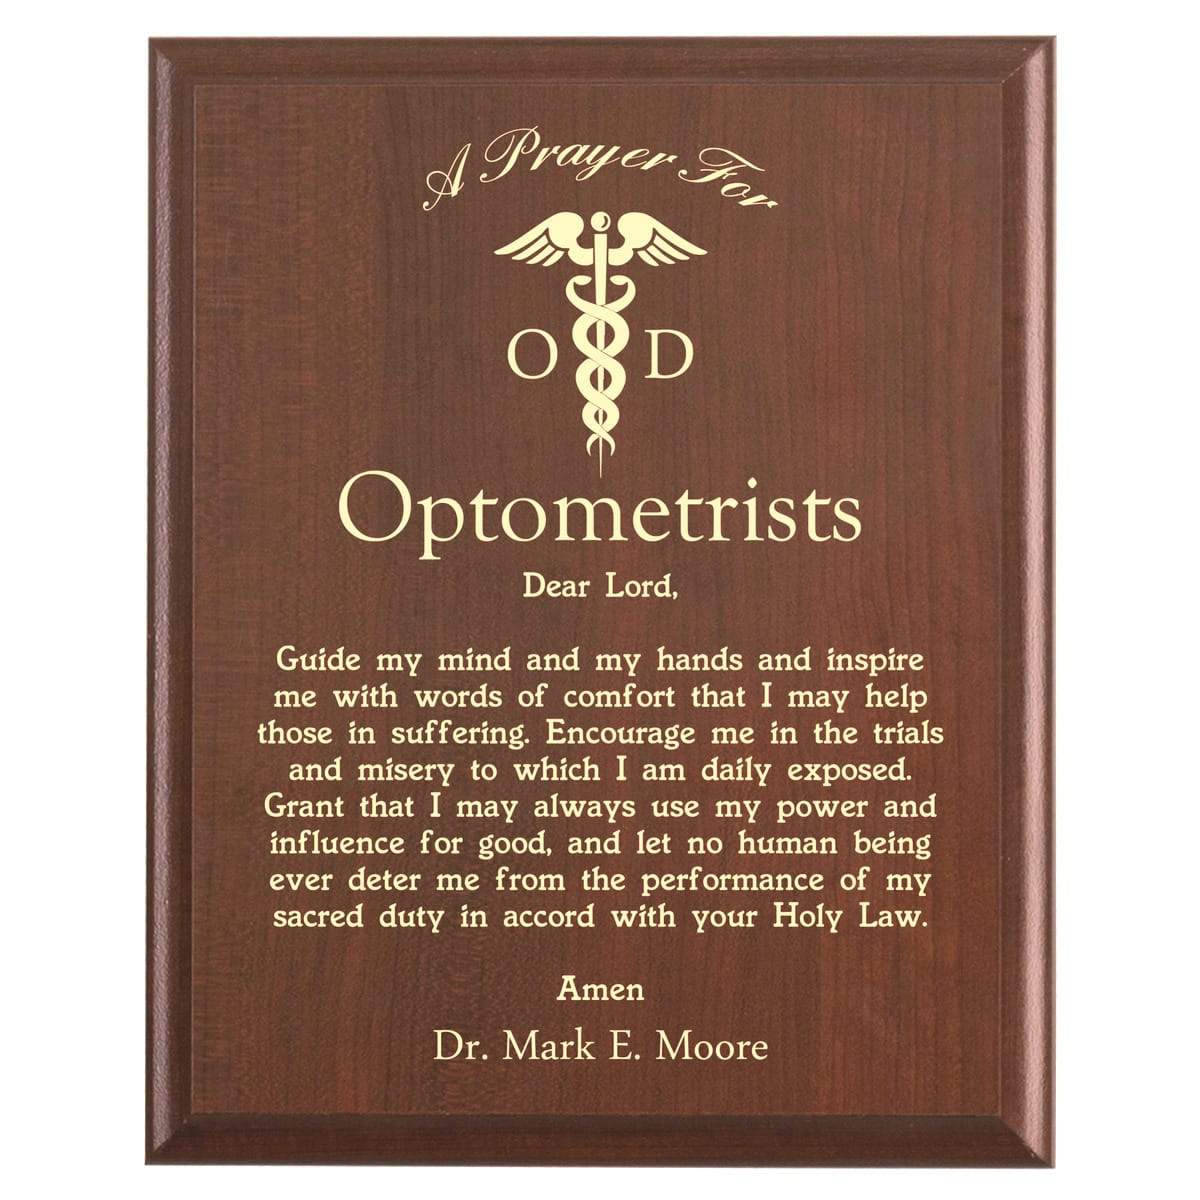 Plaque photo: Optometrist Prayer Plaque design with free personalization. Wood style finish with customized text.